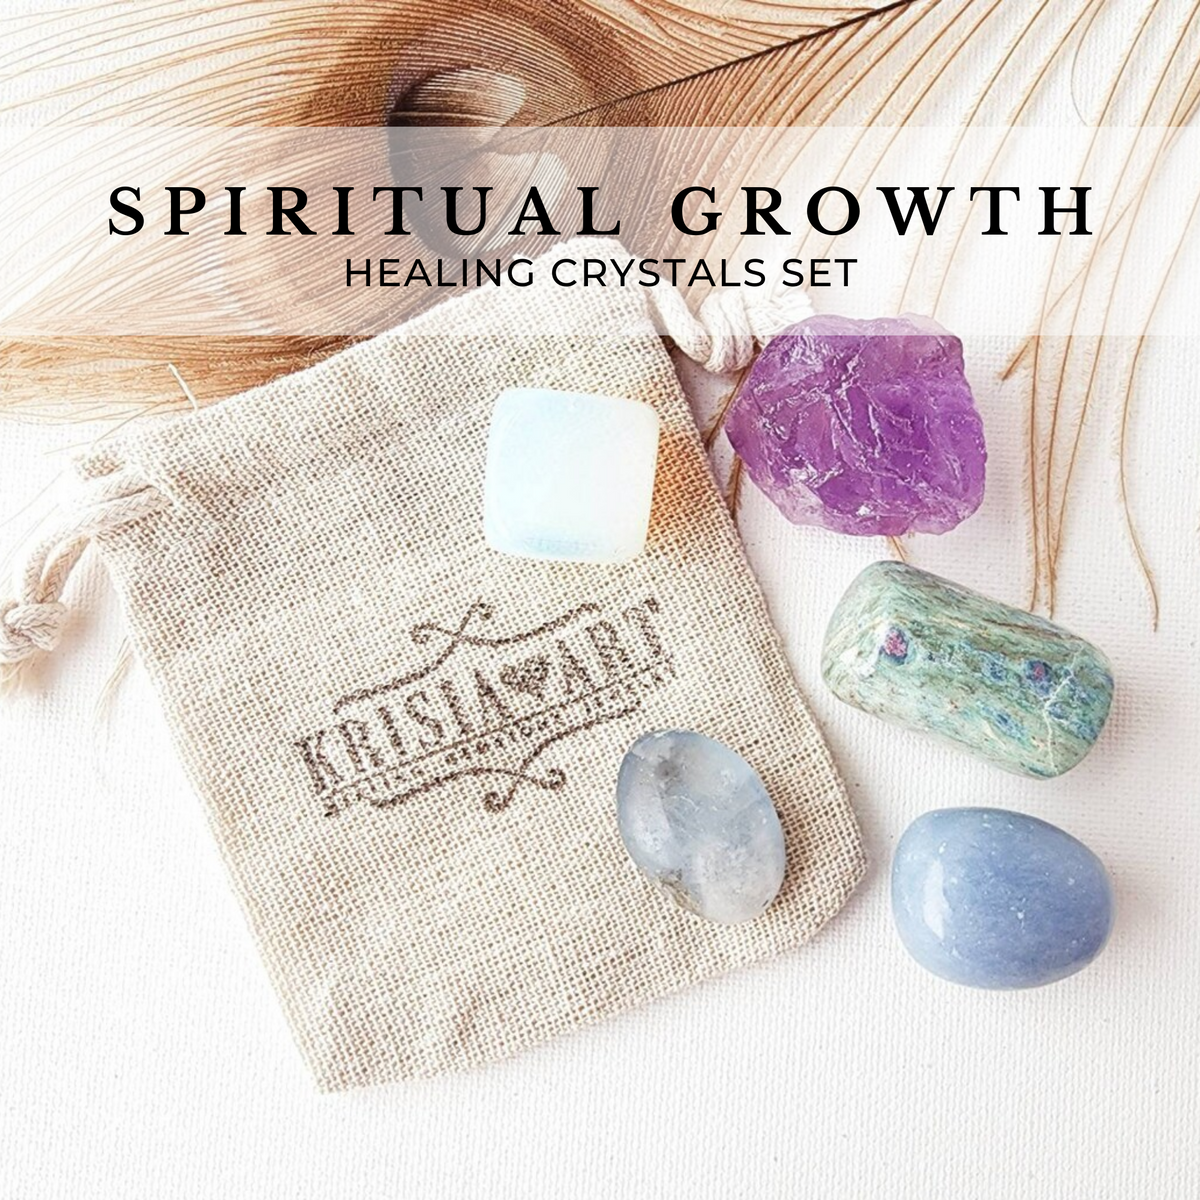 SPIRITUAL GROWTH crystal set for connection with the divine, inner wisdom, deeper meditation. Opalite, Angelite, Amethyst, Celestite, Ruby Zoisite.